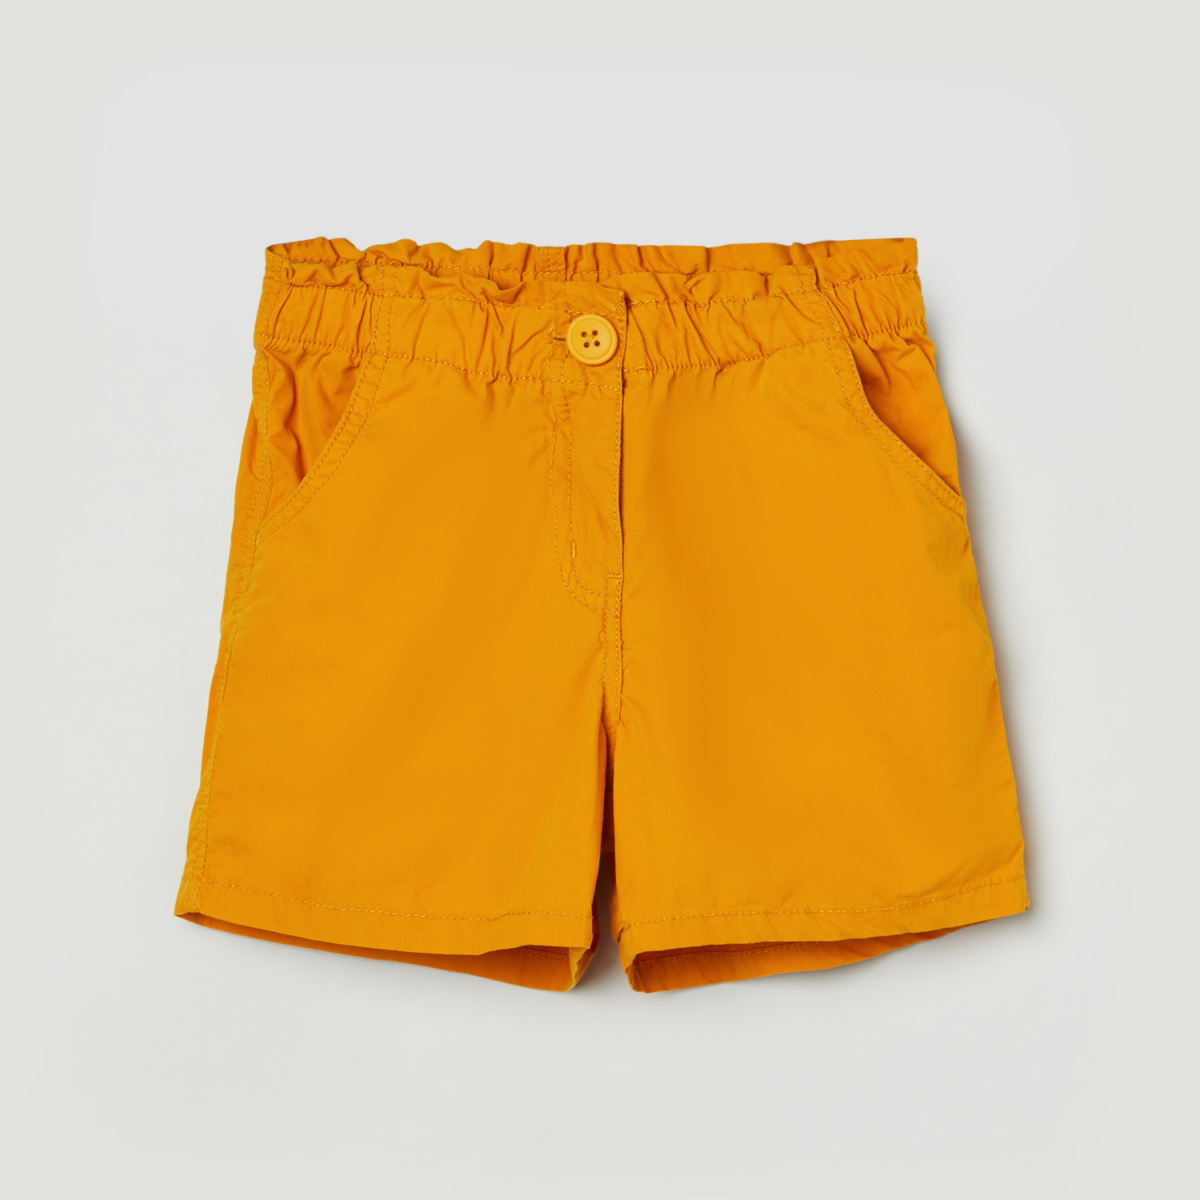 MAX Solid Woven Shorts